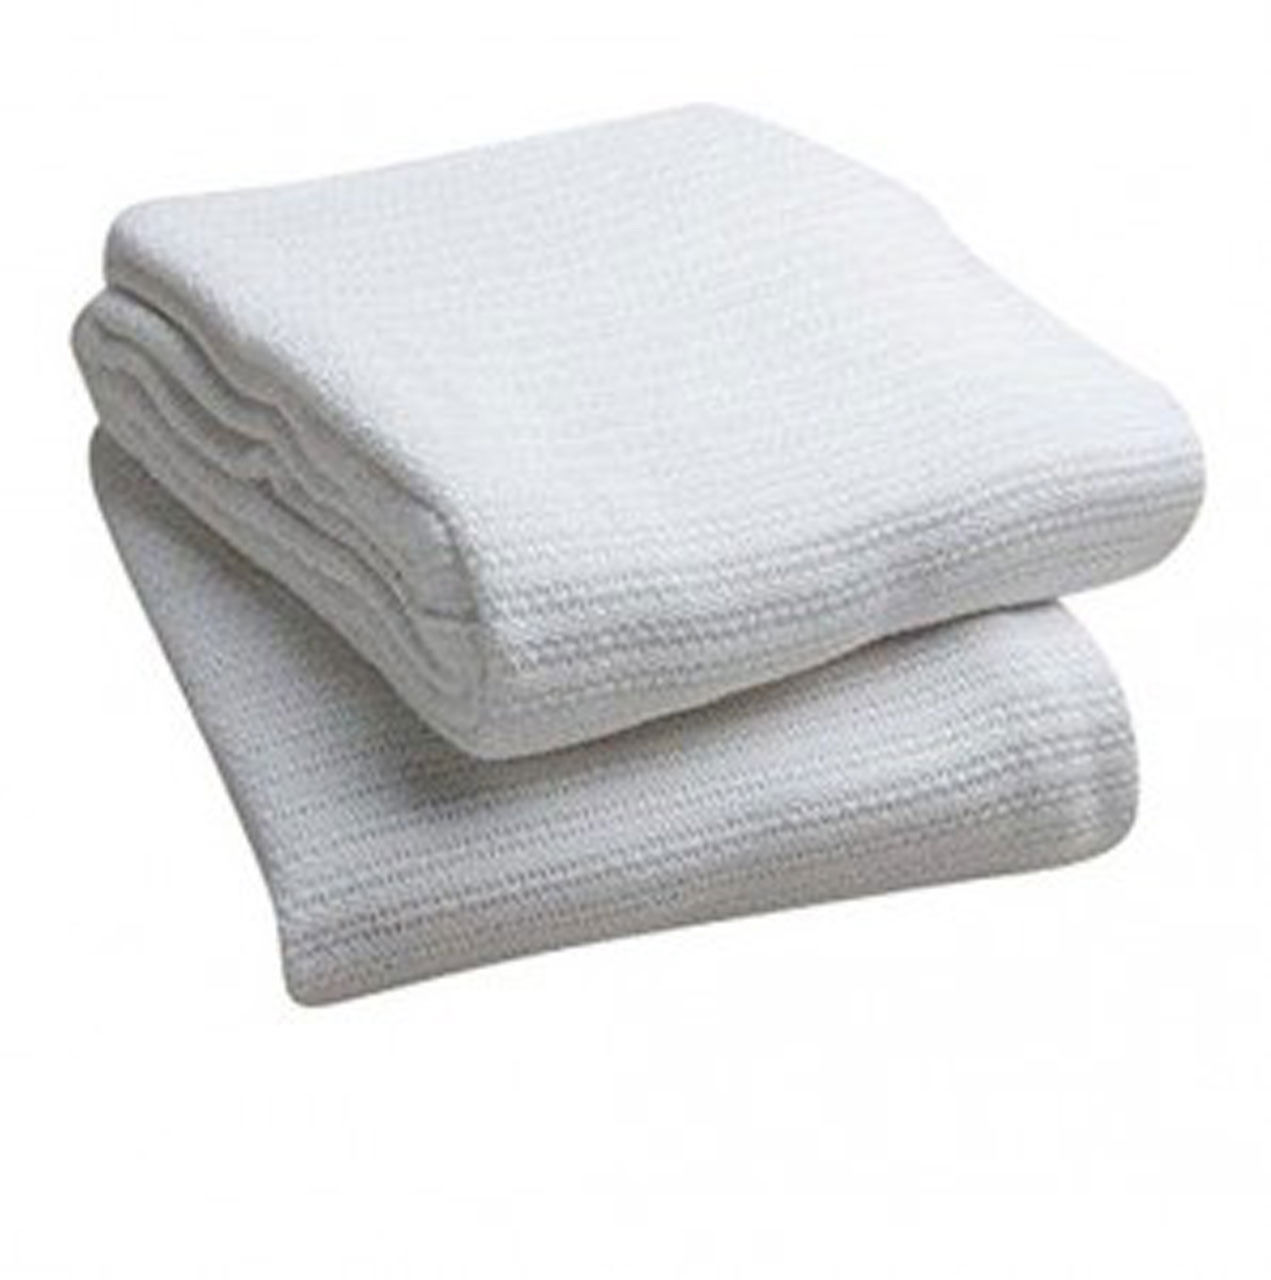 What colors are available for the Open Weave Thermal Blanket?